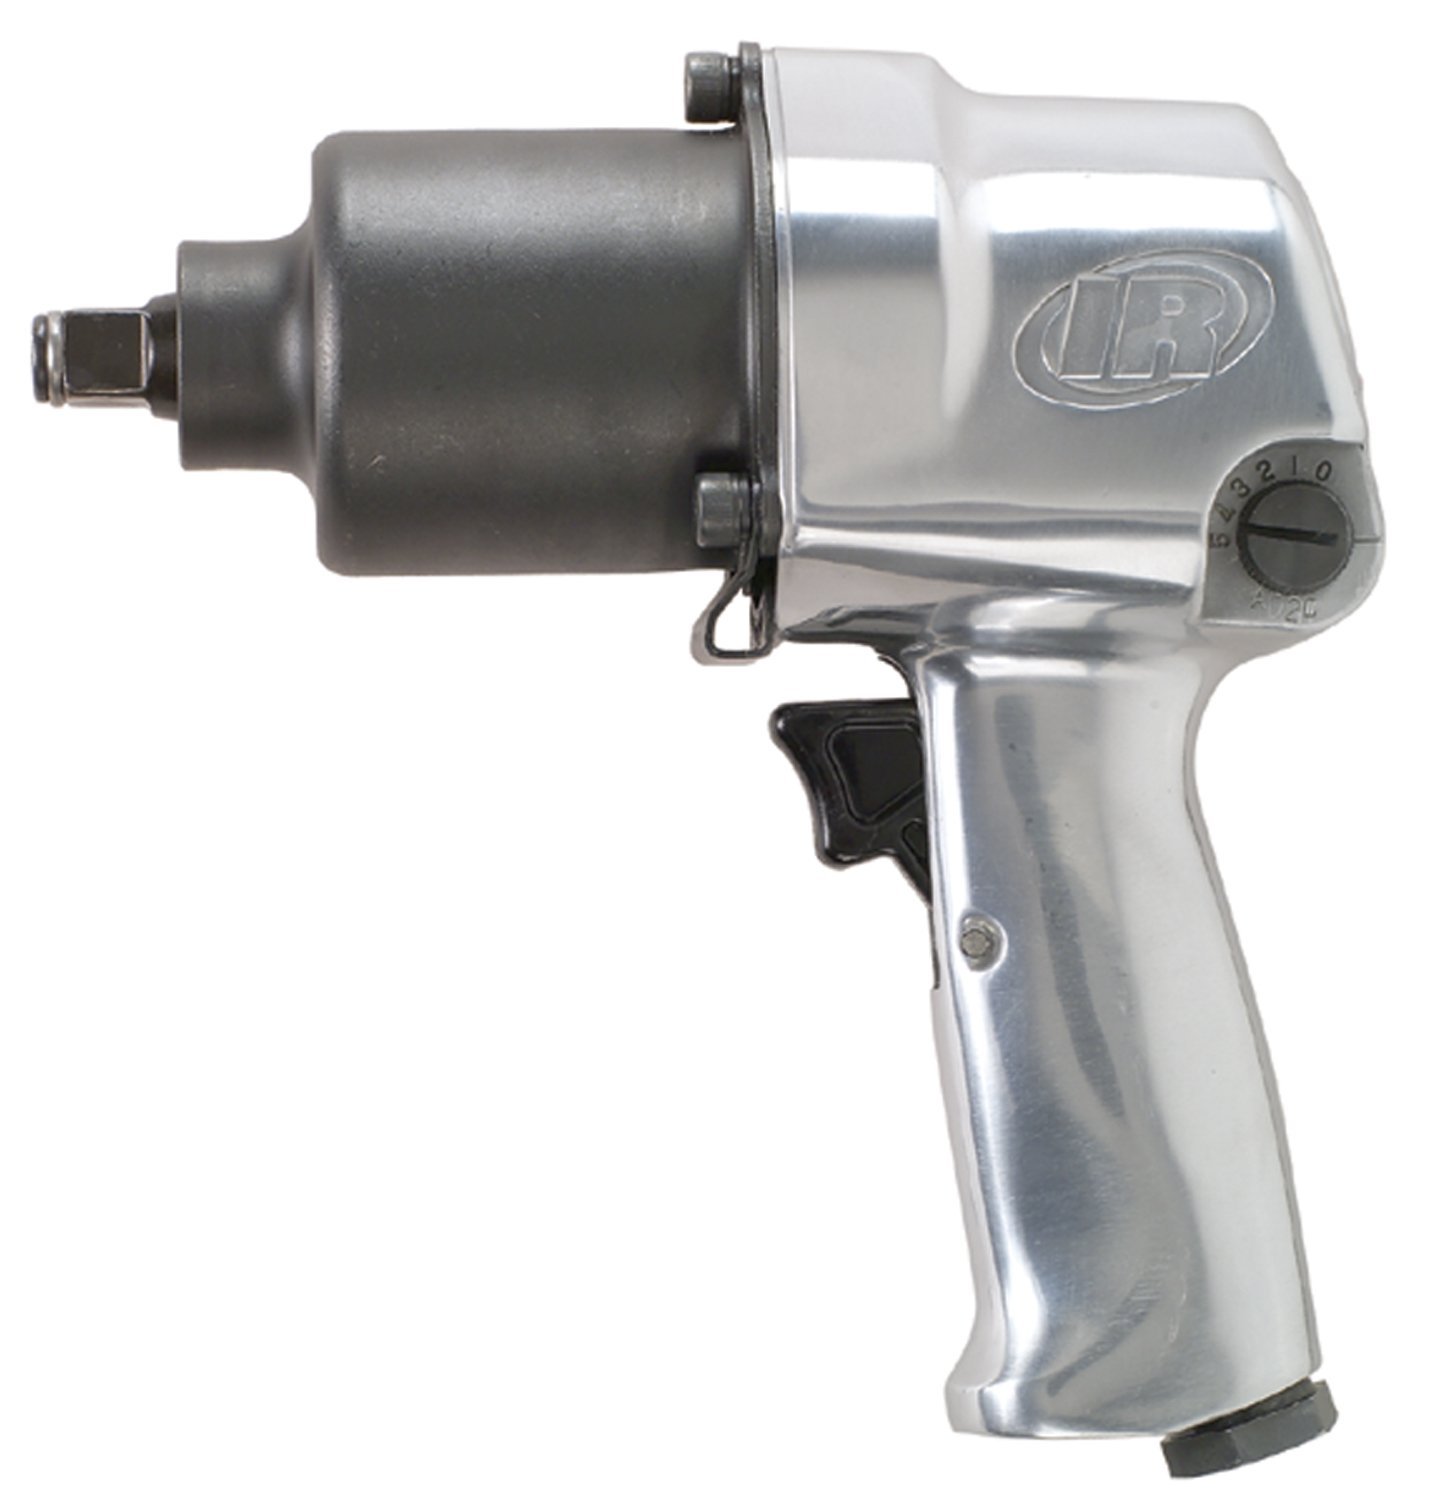 Ingersoll-Rand 1/2" dr. Extra Super Duty Impact Wrench 1,000 ft lbs torque,4,200 rpm